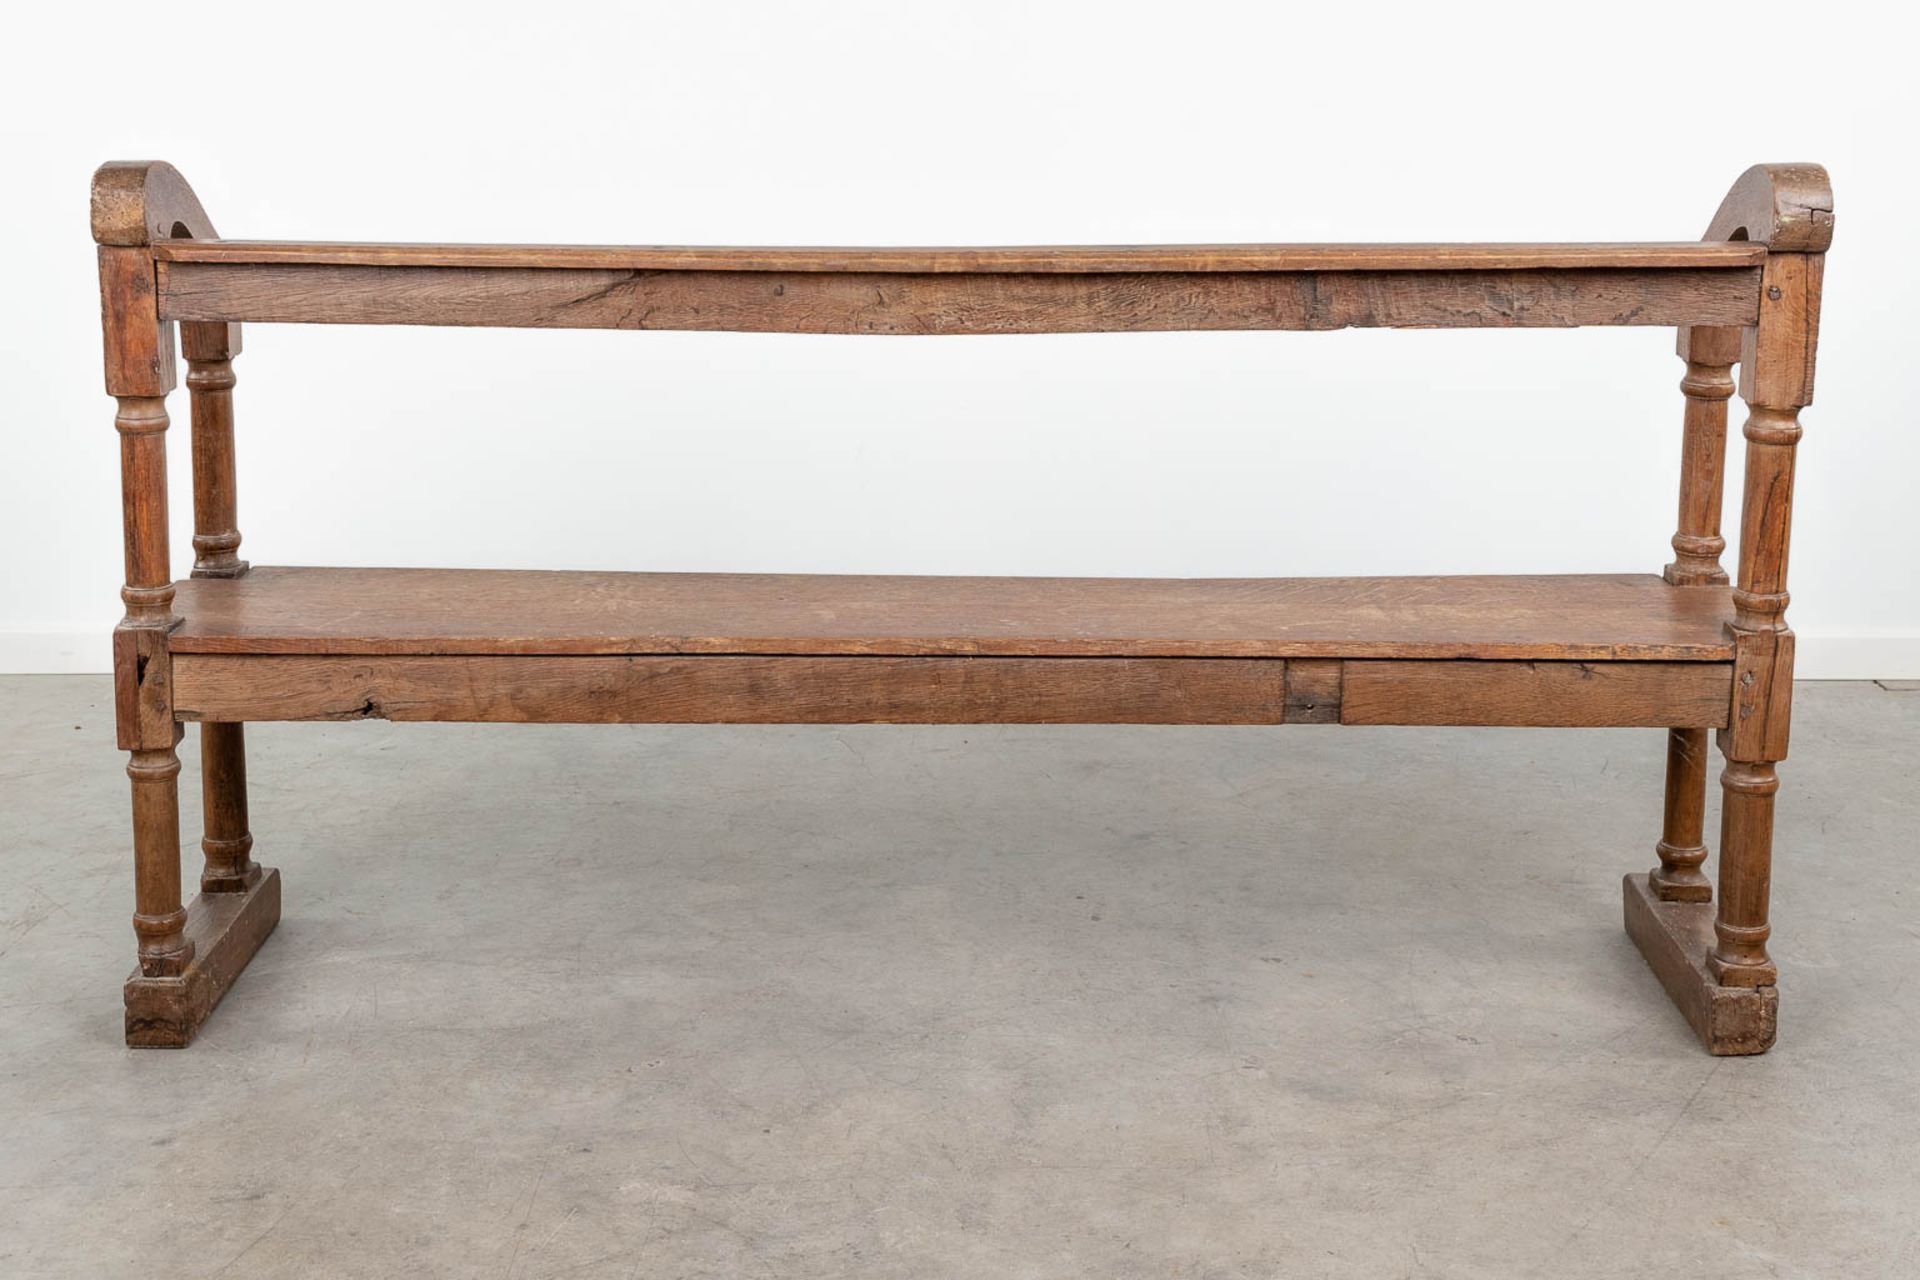 An antique bench made of oak. 19th century. (L:35 x W:164 x H:87 cm) - Image 5 of 11